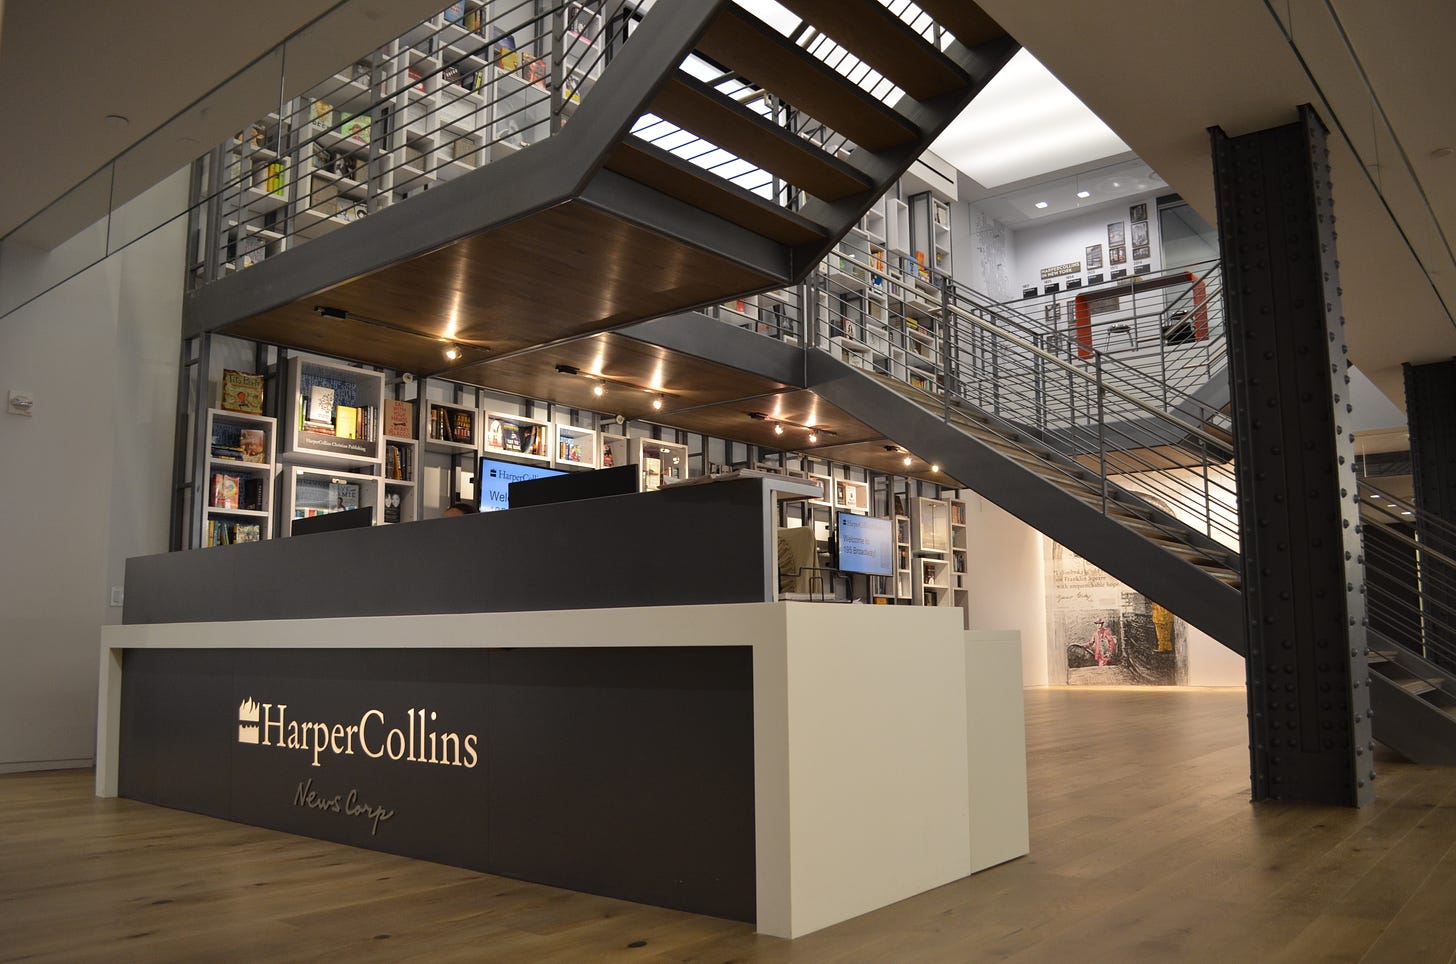 HarperCollins Launches Literacy Campaign #WhyIRead